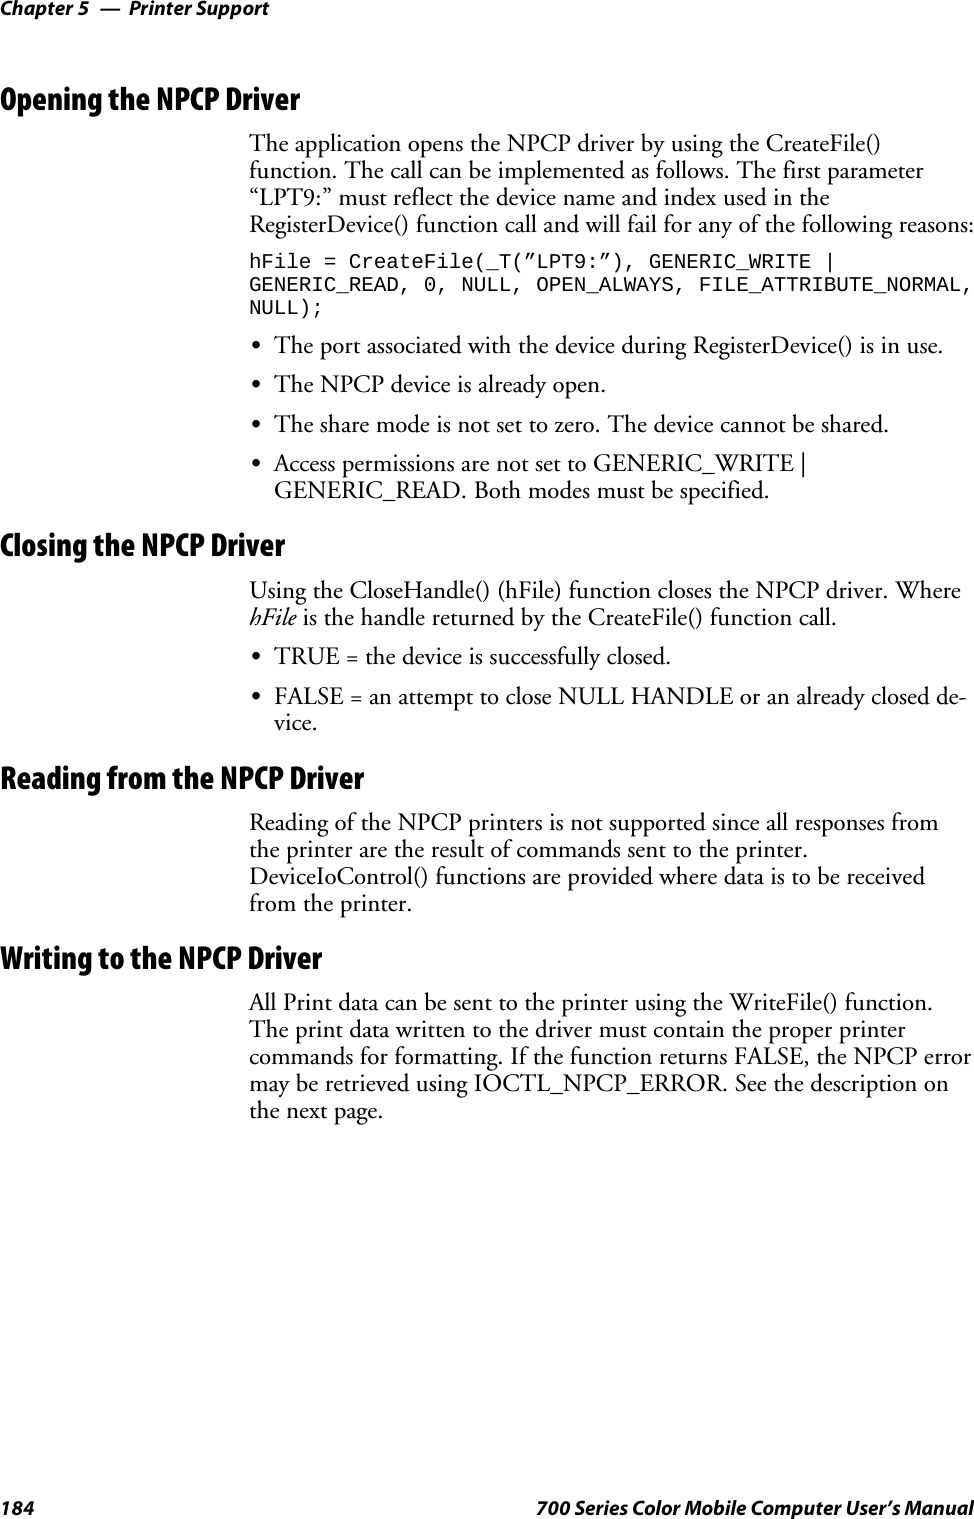 Printer SupportChapter —5184 700 Series Color Mobile Computer User’s ManualOpening the NPCP DriverThe application opens the NPCP driver by using the CreateFile()function. The call can be implemented as follows. The first parameter“LPT9:”mustreflectthedevicenameandindexusedintheRegisterDevice() function call and will fail for any of the following reasons:hFile = CreateFile(_T(”LPT9:”), GENERIC_WRITE |GENERIC_READ, 0, NULL, OPEN_ALWAYS, FILE_ATTRIBUTE_NORMAL,NULL);SThe port associated with the device during RegisterDevice() is in use.SThe NPCP device is already open.SThe share mode is not set to zero. The device cannot be shared.SAccess permissions are not set to GENERIC_WRITE |GENERIC_READ. Both modes must be specified.Closing the NPCP DriverUsing the CloseHandle() (hFile) function closes the NPCP driver. WherehFile is the handle returned by the CreateFile() function call.STRUE = the device is successfully closed.SFALSE = an attempt to close NULL HANDLE or an already closed de-vice.Reading from the NPCP DriverReading of the NPCP printers is not supported since all responses fromthe printer are the result of commands sent to the printer.DeviceIoControl() functions are provided where data is to be receivedfrom the printer.Writing to the NPCP DriverAll Print data can be sent to the printer using the WriteFile() function.The print data written to the driver must contain the proper printercommands for formatting. If the function returns FALSE, the NPCP errormay be retrieved using IOCTL_NPCP_ERROR. See the description onthe next page.